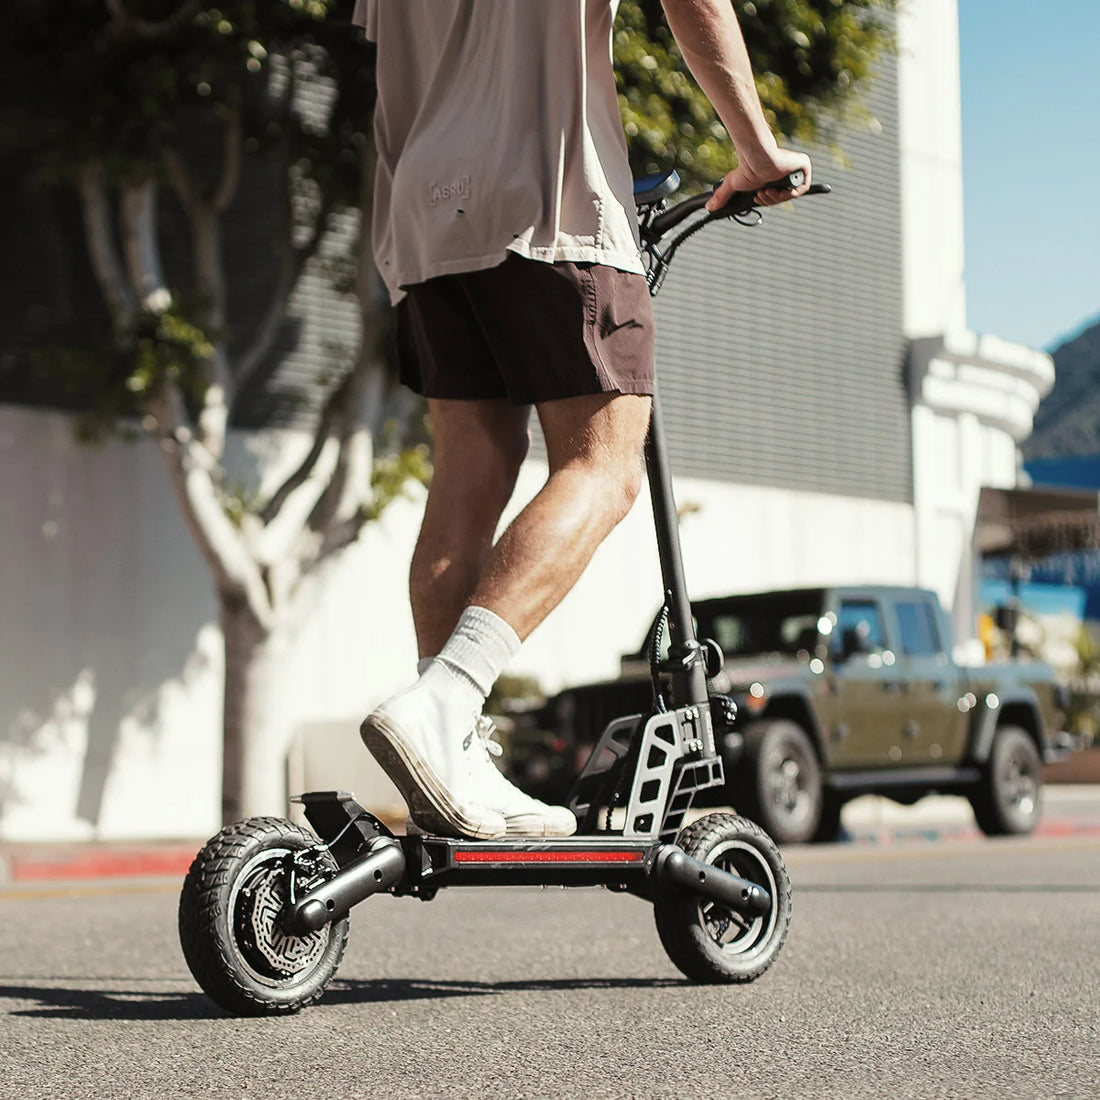 Top 3 Electric Scooters of 2022 For the Everyday Rider – T-Dot Wheels